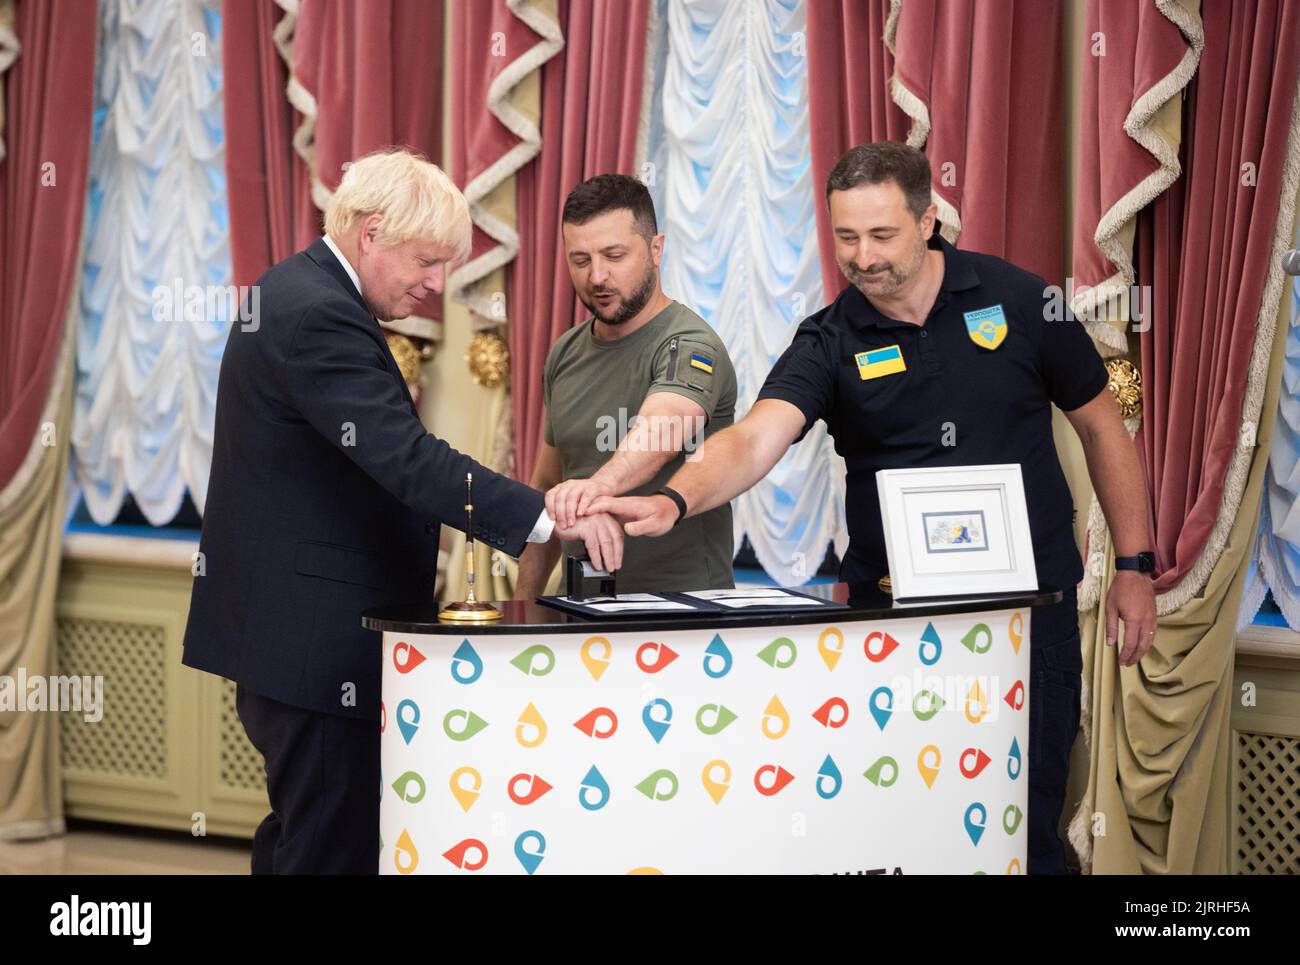 Lviv, Ukraine. 24th Aug, 2022. British Prime Minister Boris Johnson, left, Ukrainian President Volodymyr Zelenskyy, center, and Ukrposhta Director Ihor Smilianskyi, right, cancel the first set of the newly issued postage stamp marking the last six month of the Russian Invasion during a ceremony at the Mariinsky Palace, August 24, 2022 in Kyiv Ukraine. The stamp called “Free, Unbreakable, Unbeatable”, was released for the 31st anniversary of Ukraine independence. Credit: Sarsenov Daniiar/Ukraine Presidency/Alamy Live News Stock Photo